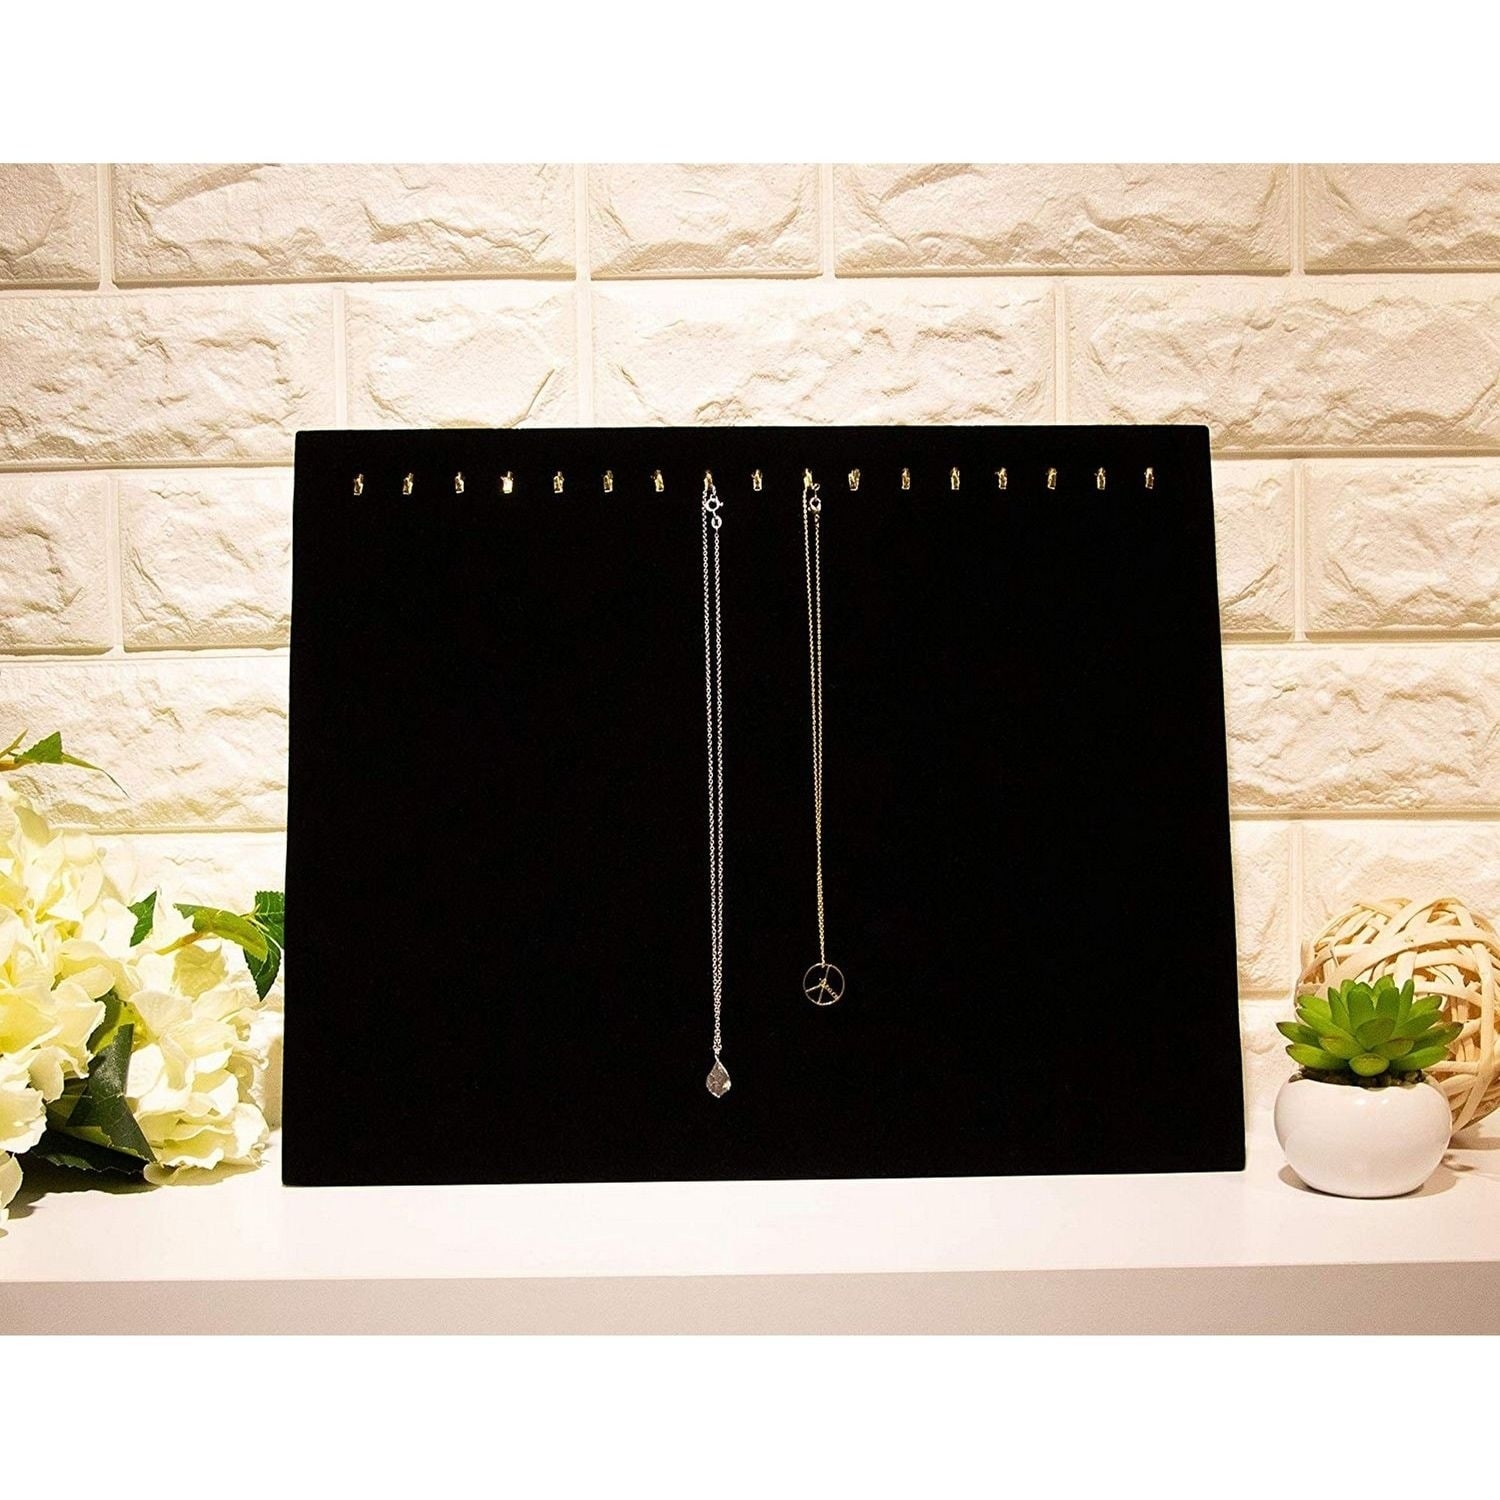 Home Tray Show Necklace Organizer for Bracelets 2-Pack 17 Hooks Velvet Necklace Board Jewelry Storage Shop Retail Holder Chains Display Stand Chockers Black 14.6 x 11.9 x 4.5 Inches